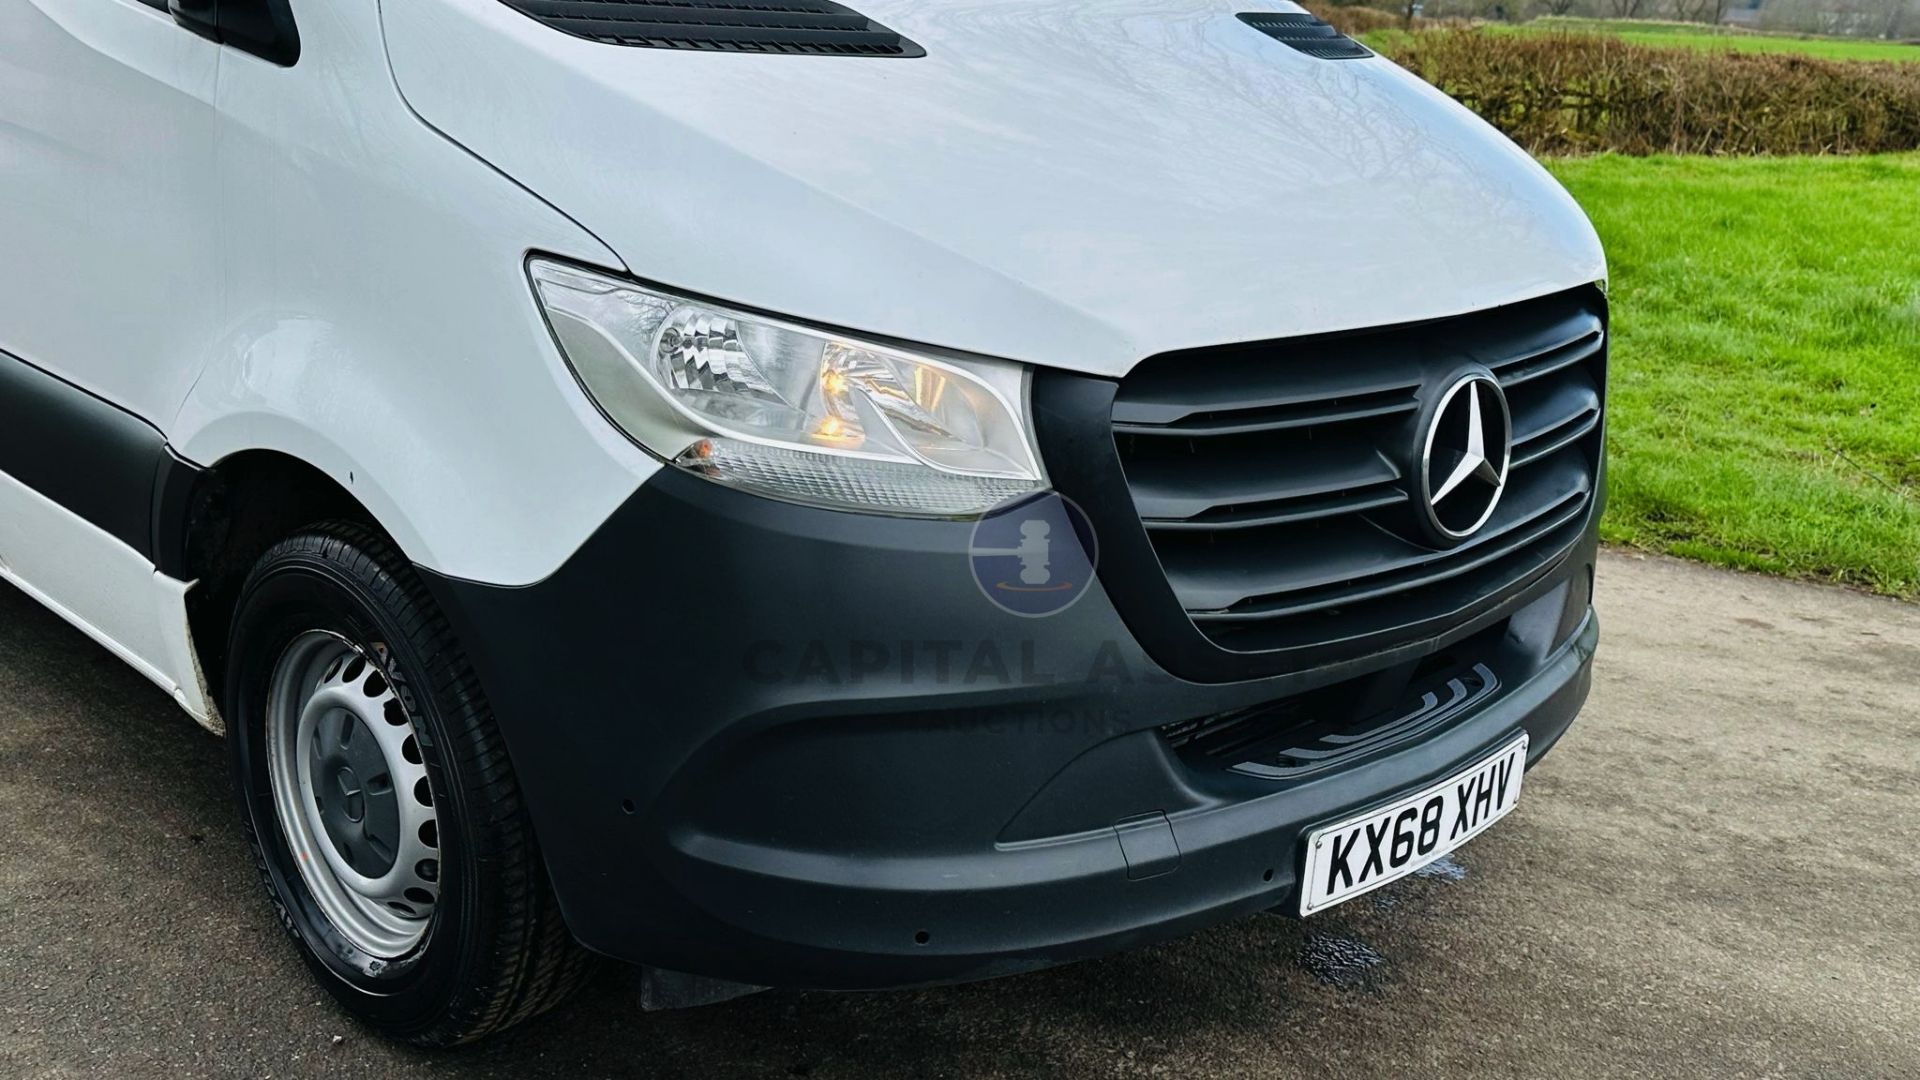 MERCEDES-BENZ SPRINTER 314 CDI *MWB - REFRIGERATED VAN* (2019 - FACELIFT MODEL) *OVERNIGHT STANDBY* - Image 4 of 41